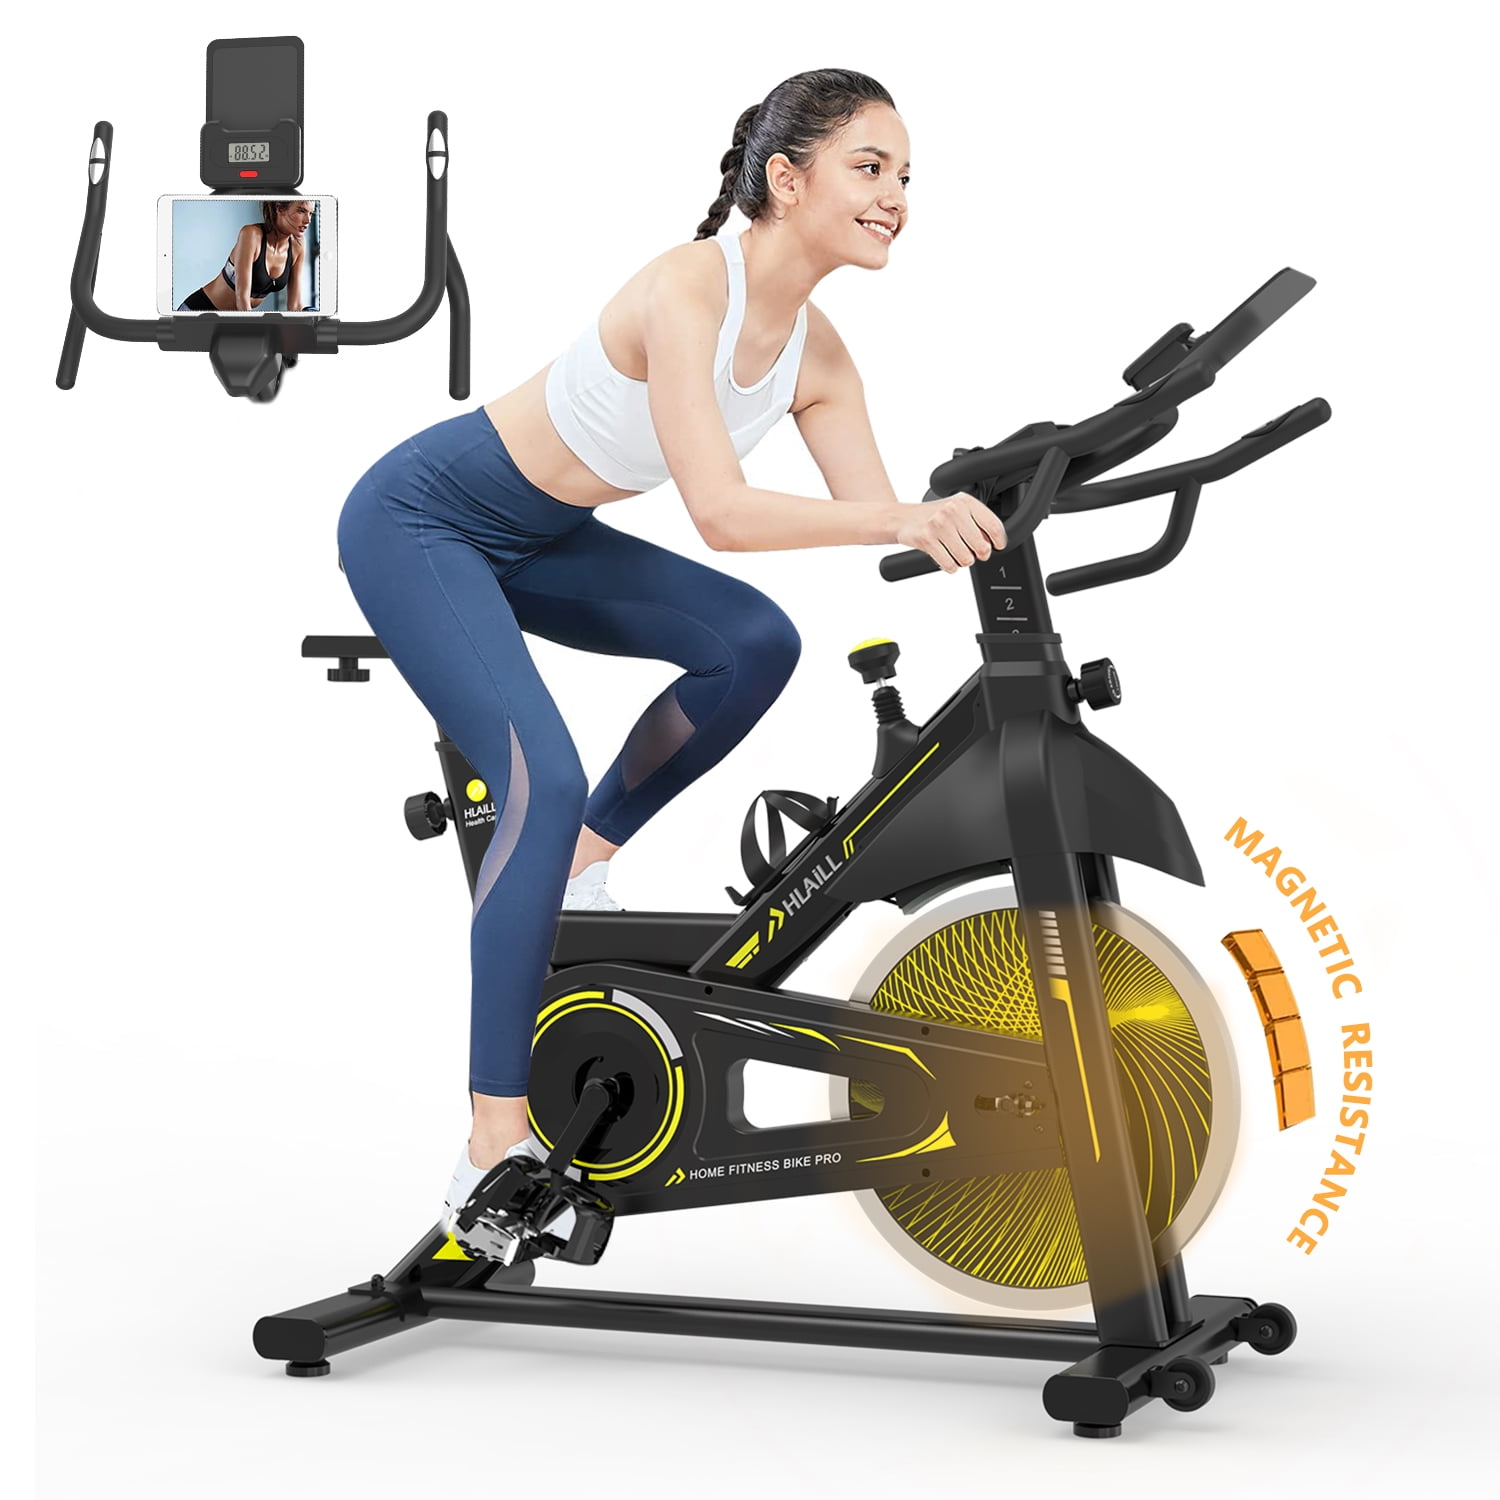 Details about   Upgraded Upright Exercise Bike Interactive Workout Trainer Heart rate B s e 76 